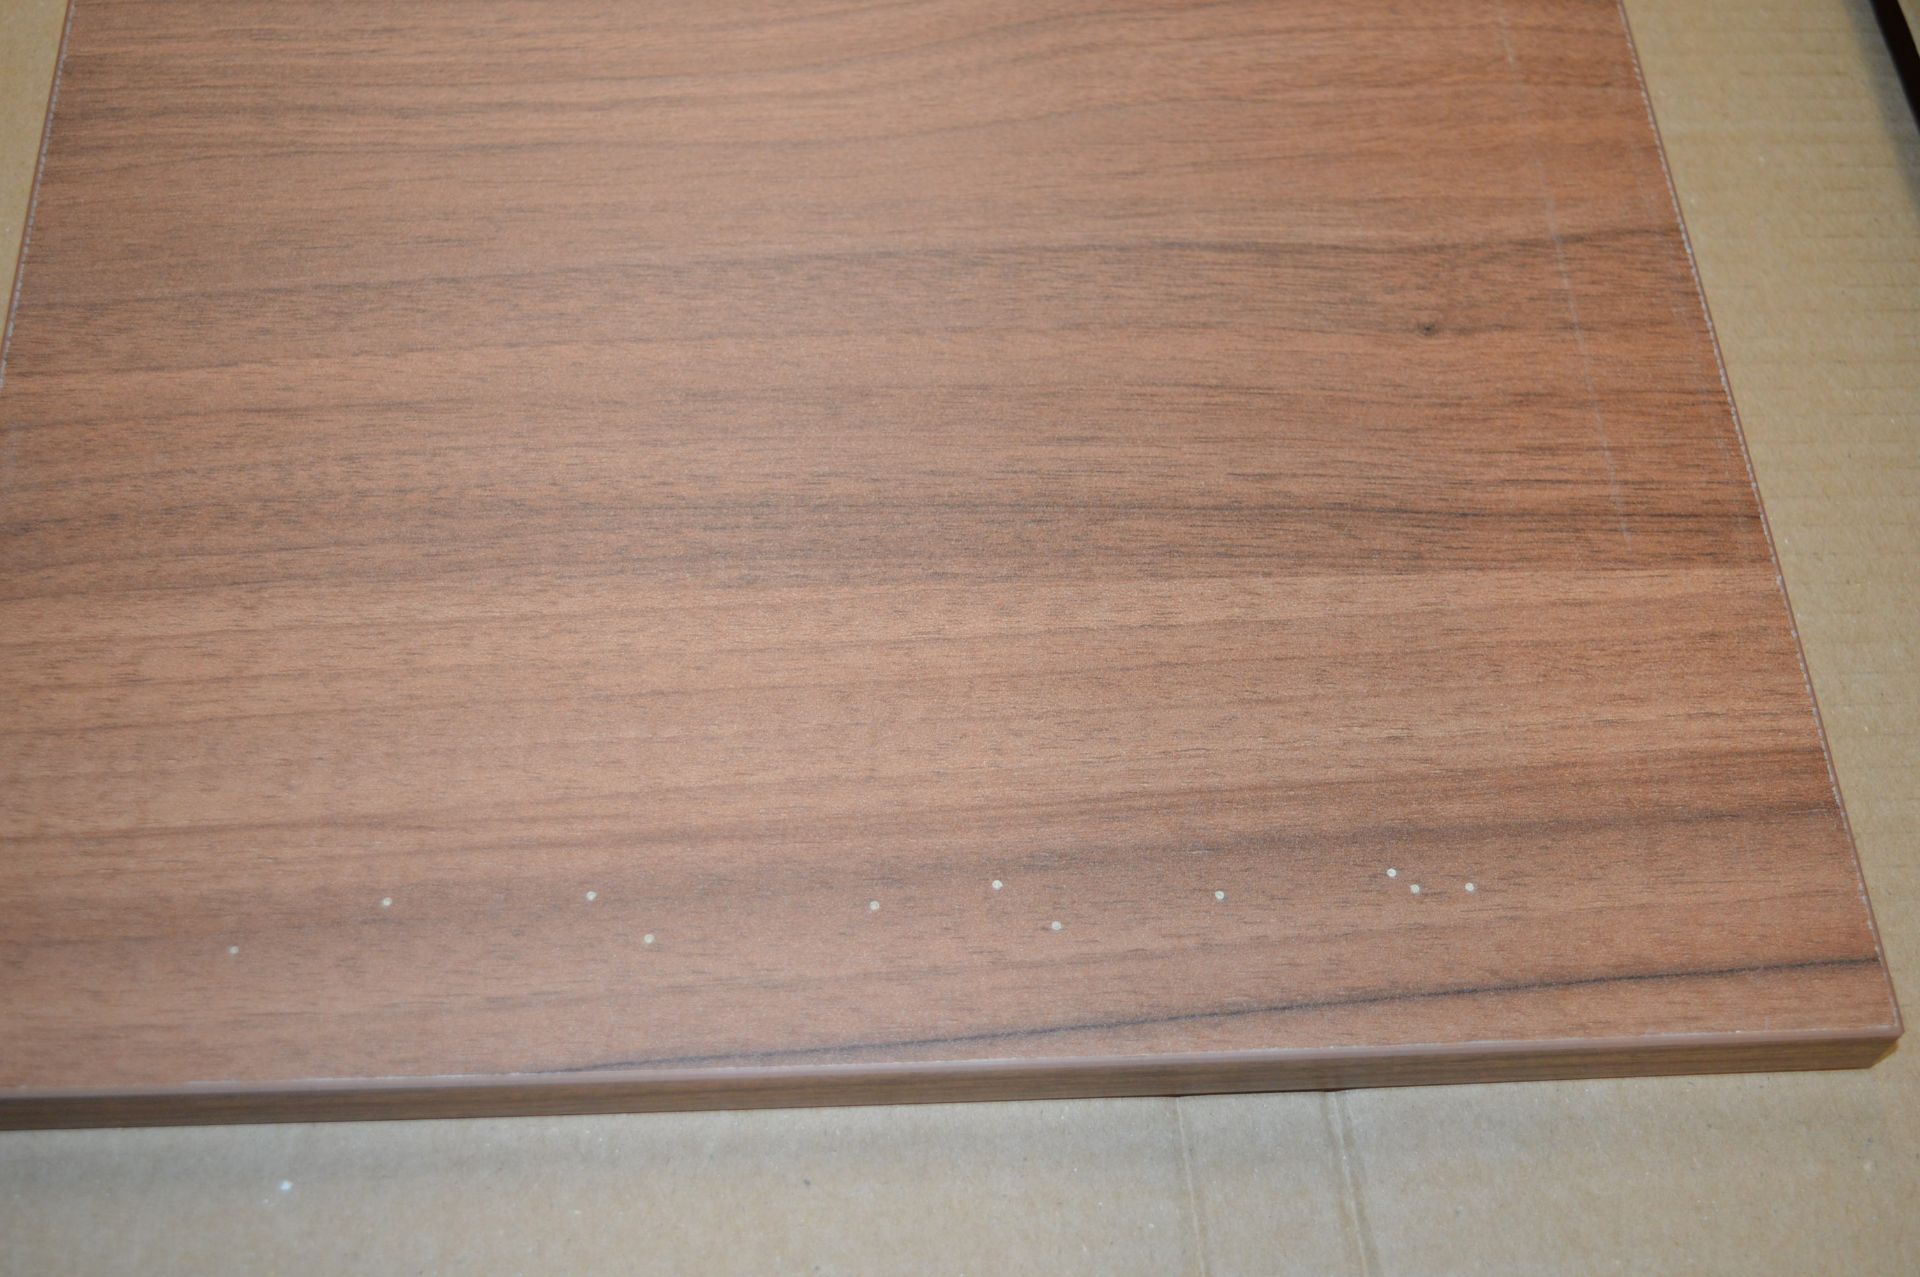 Two Walnut Frontal Drawer Panels 316x496mm - Image 3 of 3